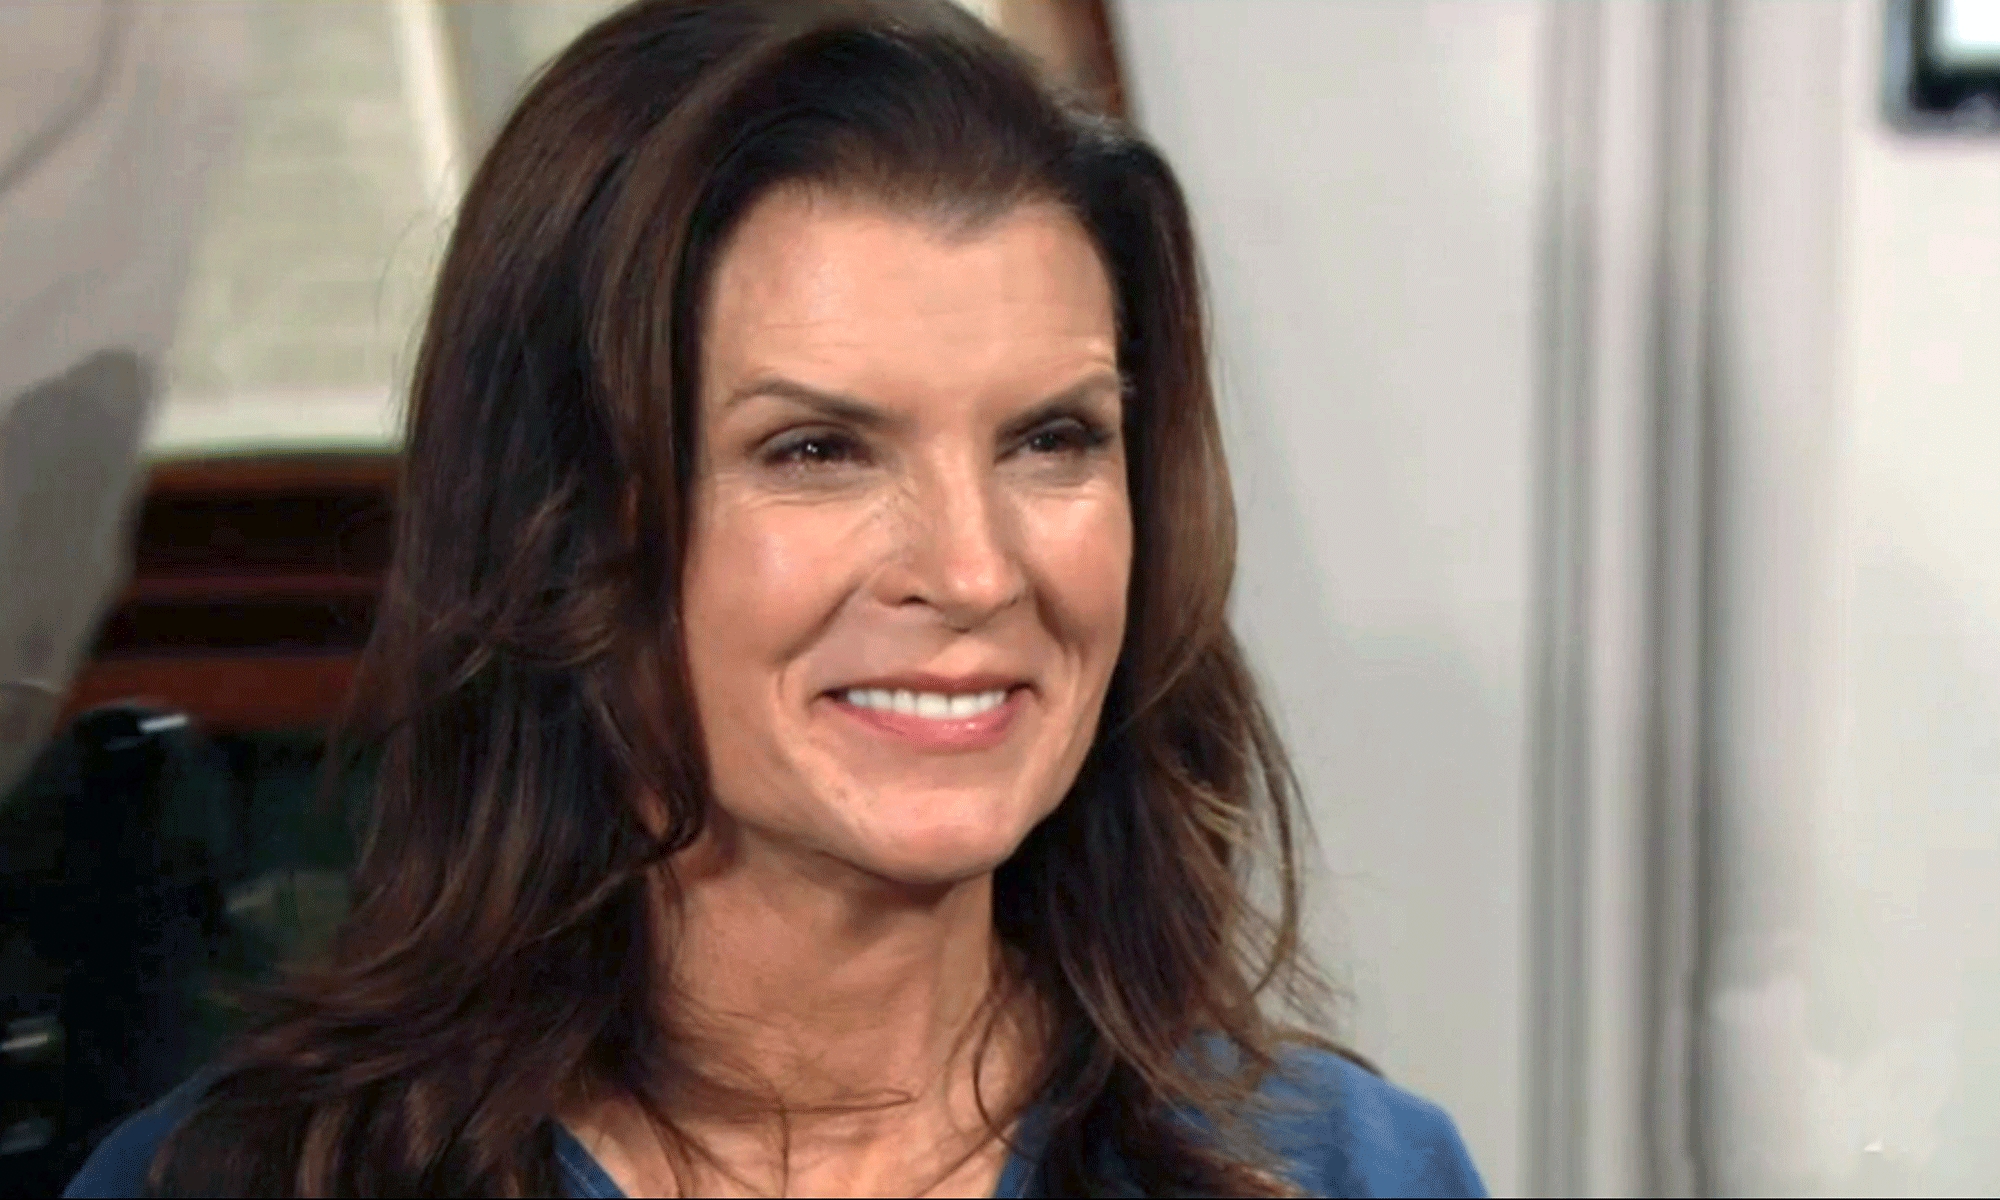 sheila carter smiling after being told she's going free on bold and the beautiful